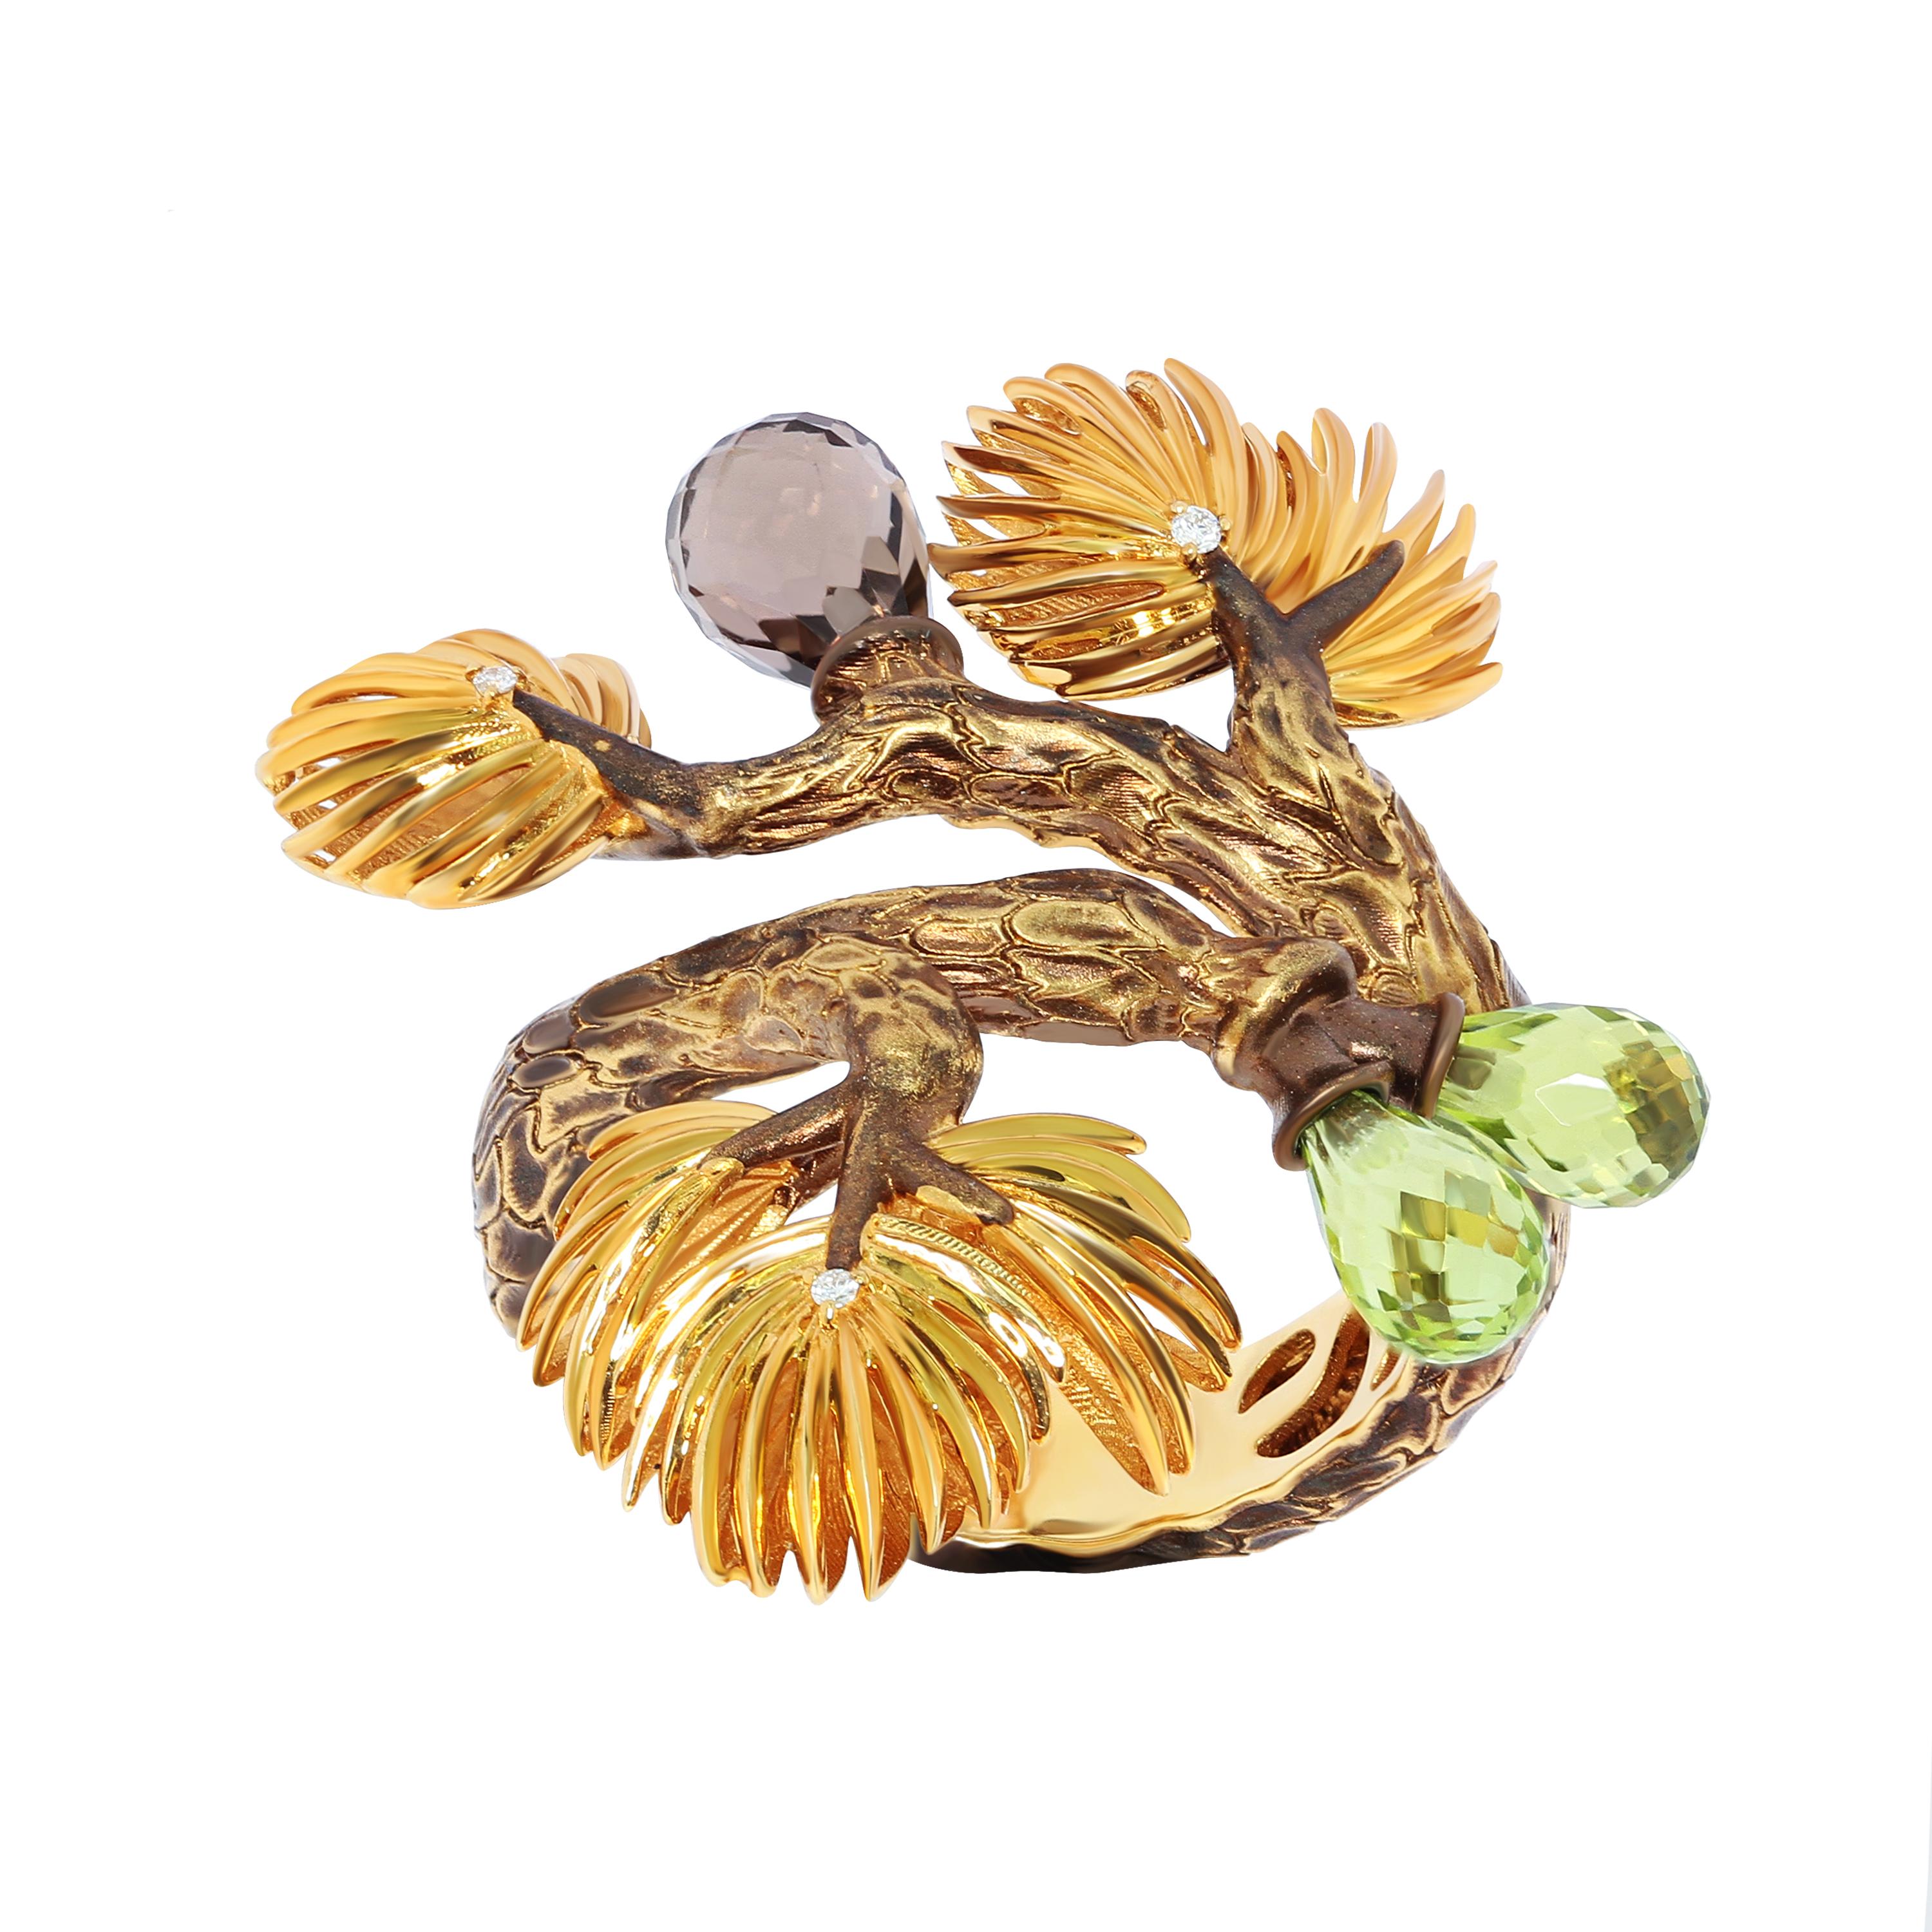 Peridot Smoky Quartz Diamonds 18 Karat Yellow Gold Pine Ring
The evergreen Pine is a symbol of immortality and vitality. Even in winter, when nature sleeps, this beautiful green tree reminds us that spring is coming. Our Ring from Forest Collection